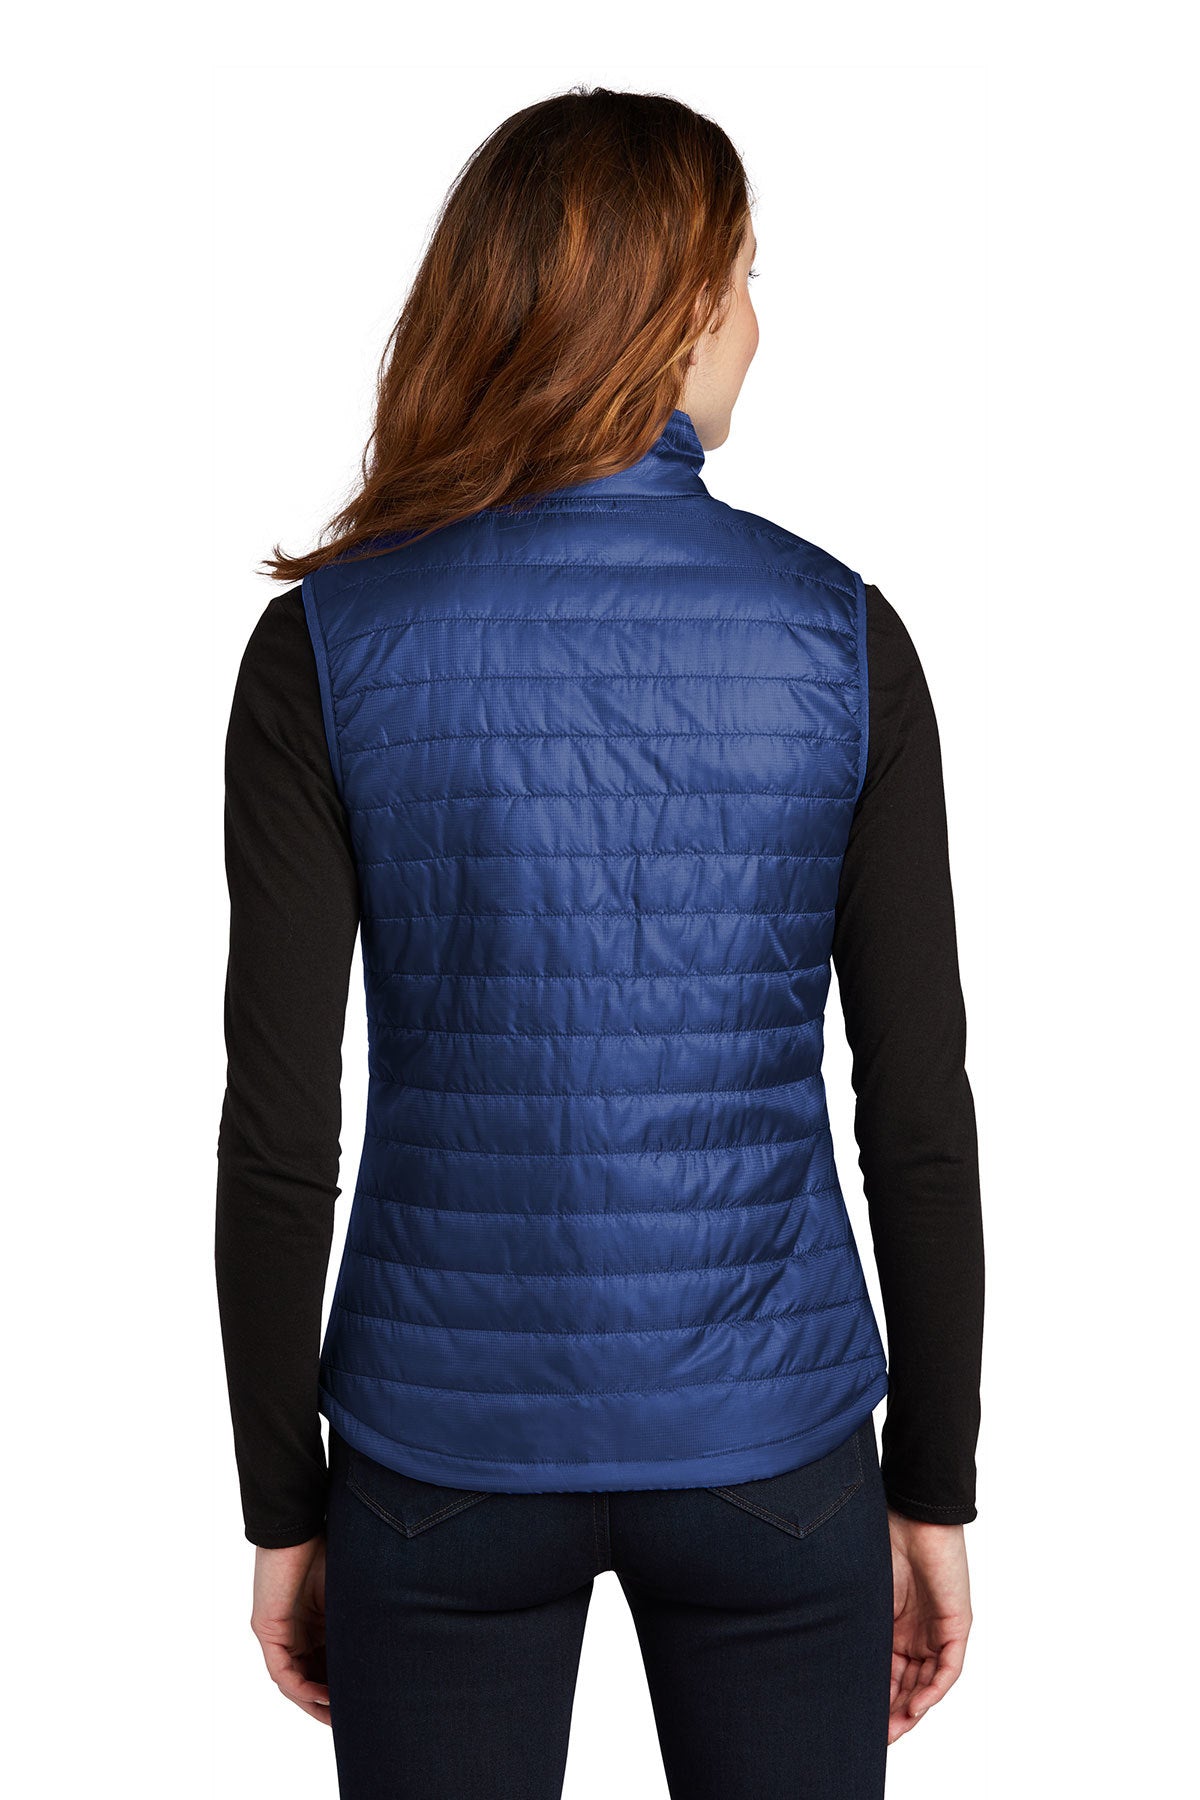 FiA Port Authority Ladies Packable Puffy Vest - Made to Order